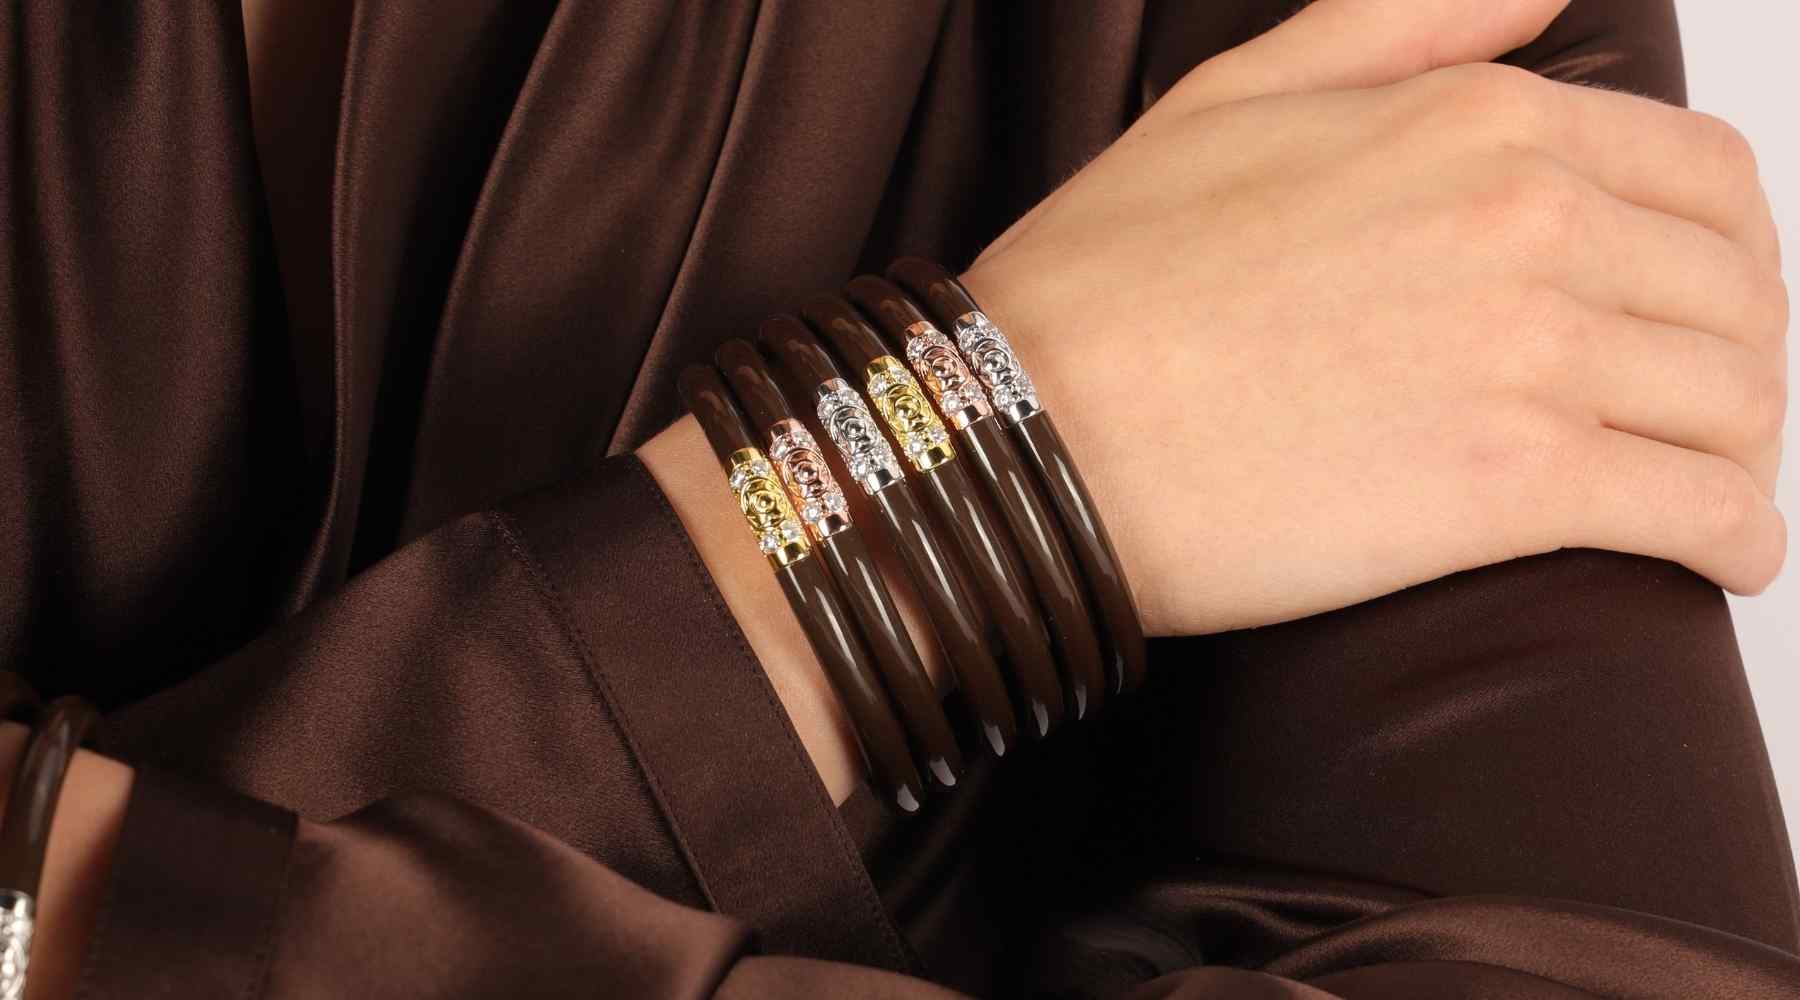 Chocolate and Gold Jewelry | Brown Bangles and Bracelet Sets | BuDhaGirl